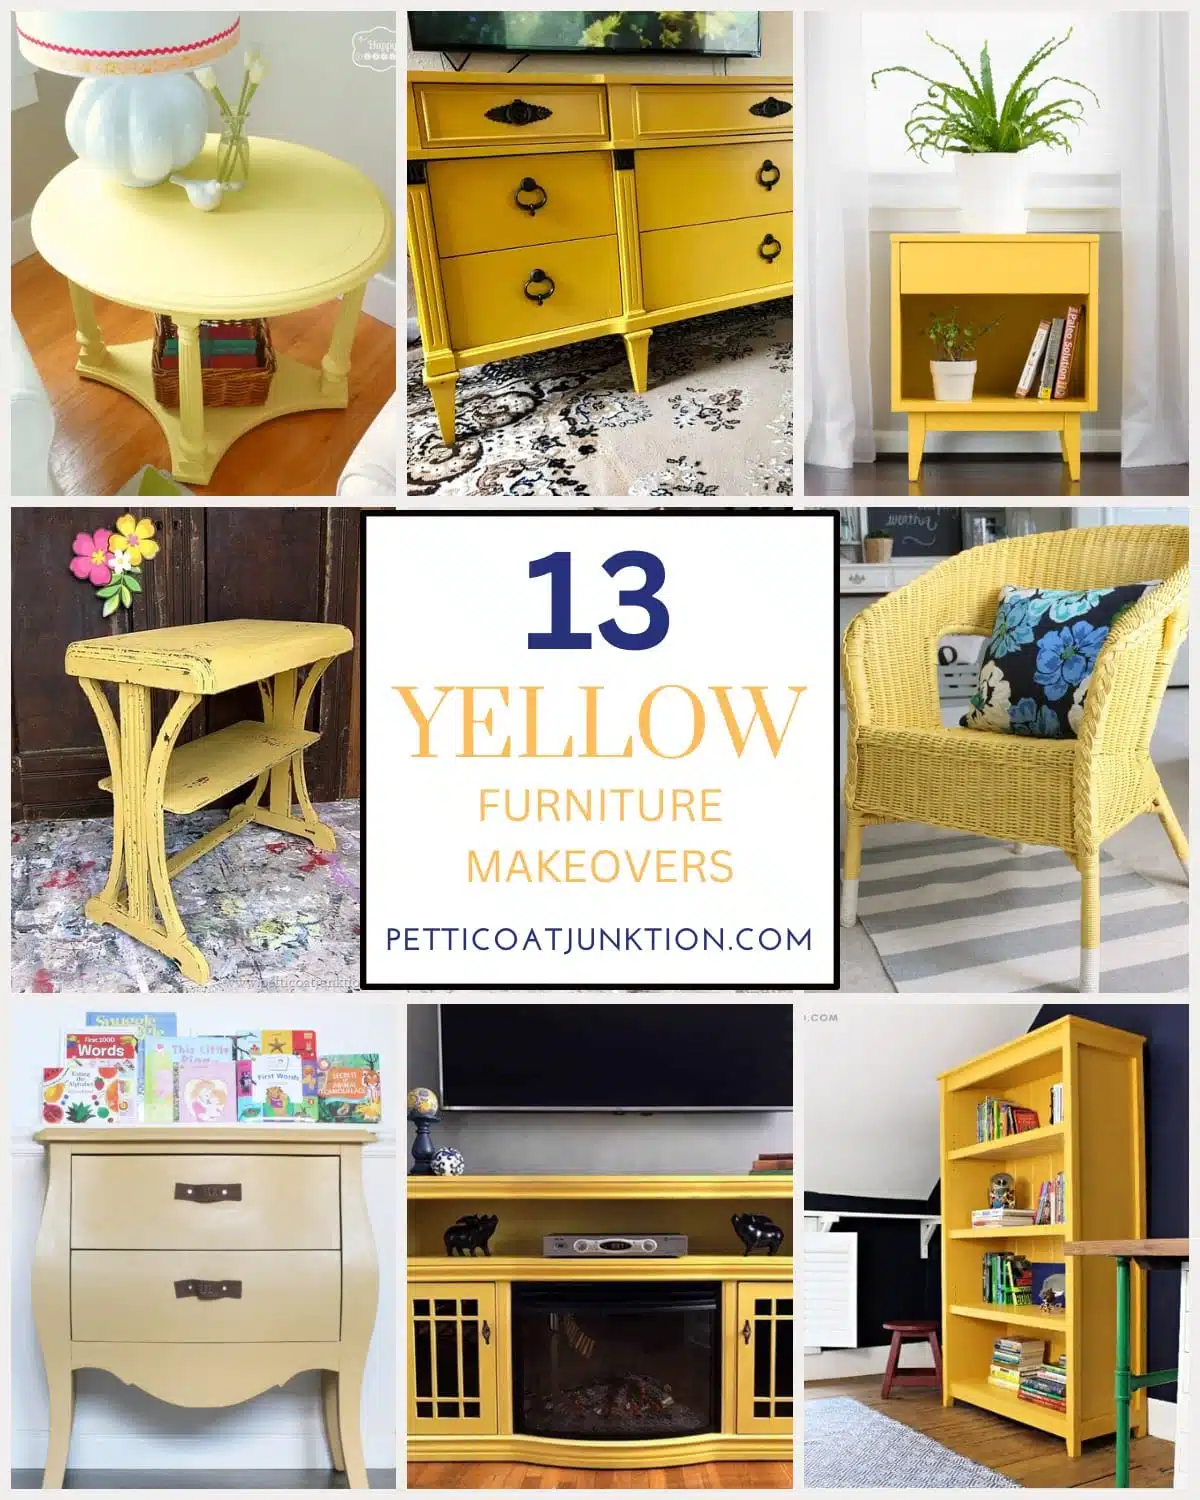 13 Yellow Furniture Makeovers